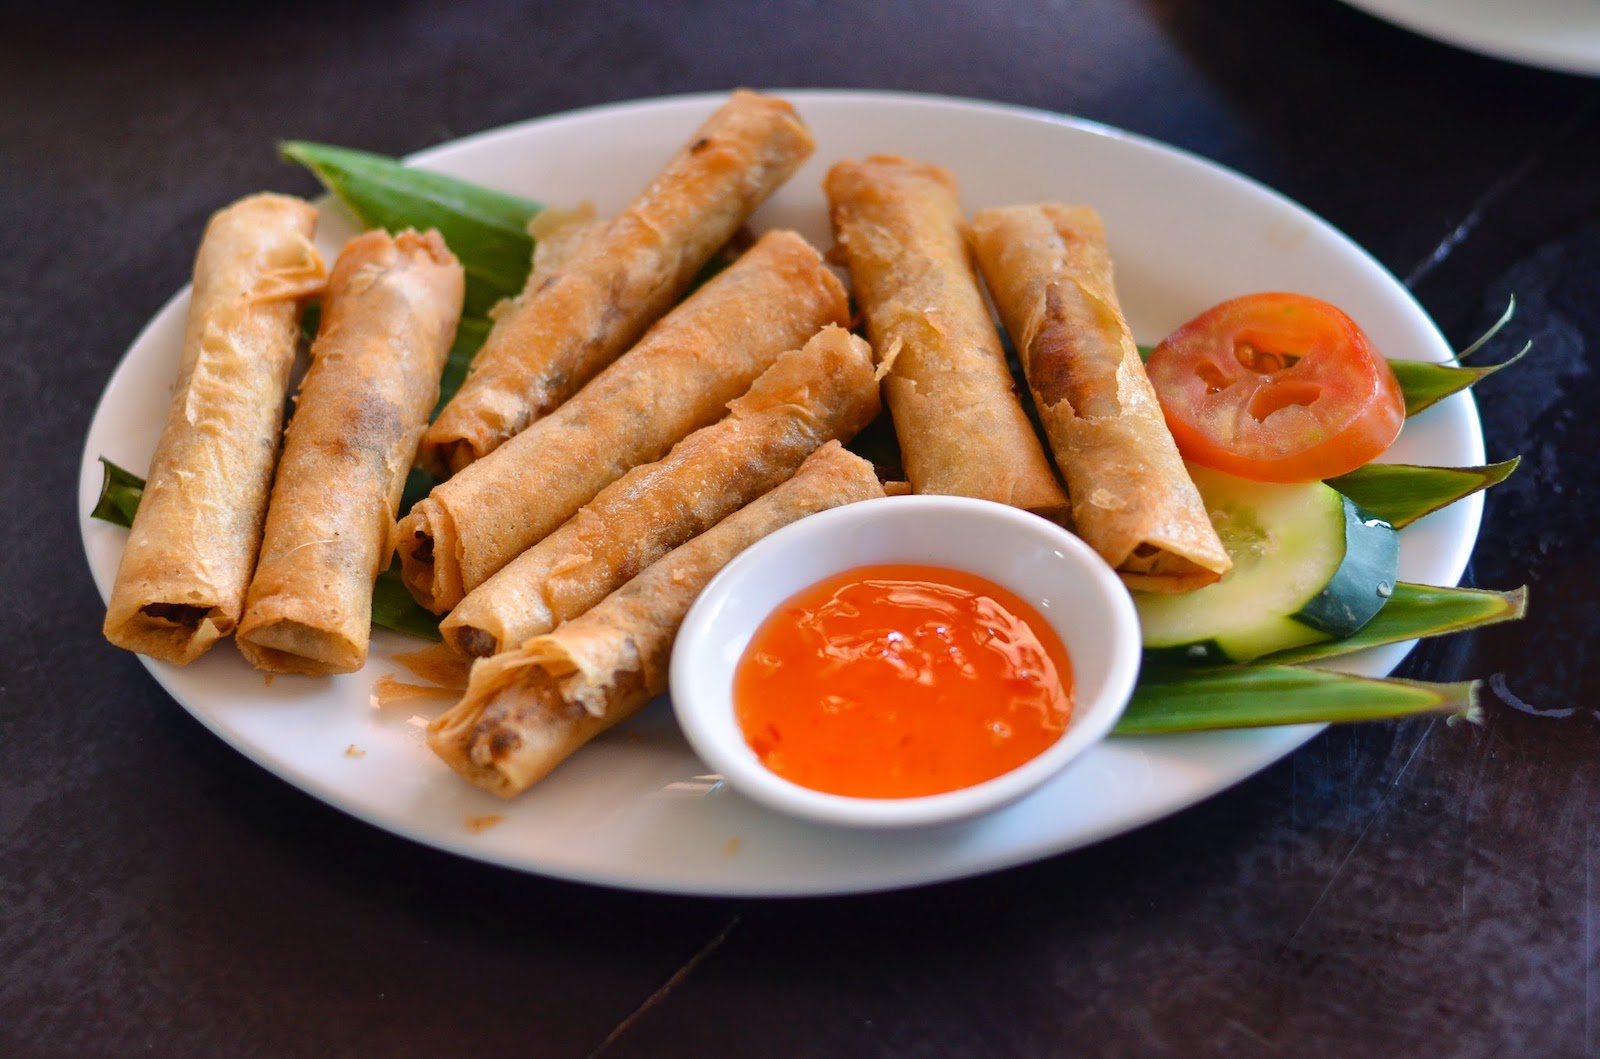 Lumpiang Shanghai served on a plate with sweet-chili sauce dip